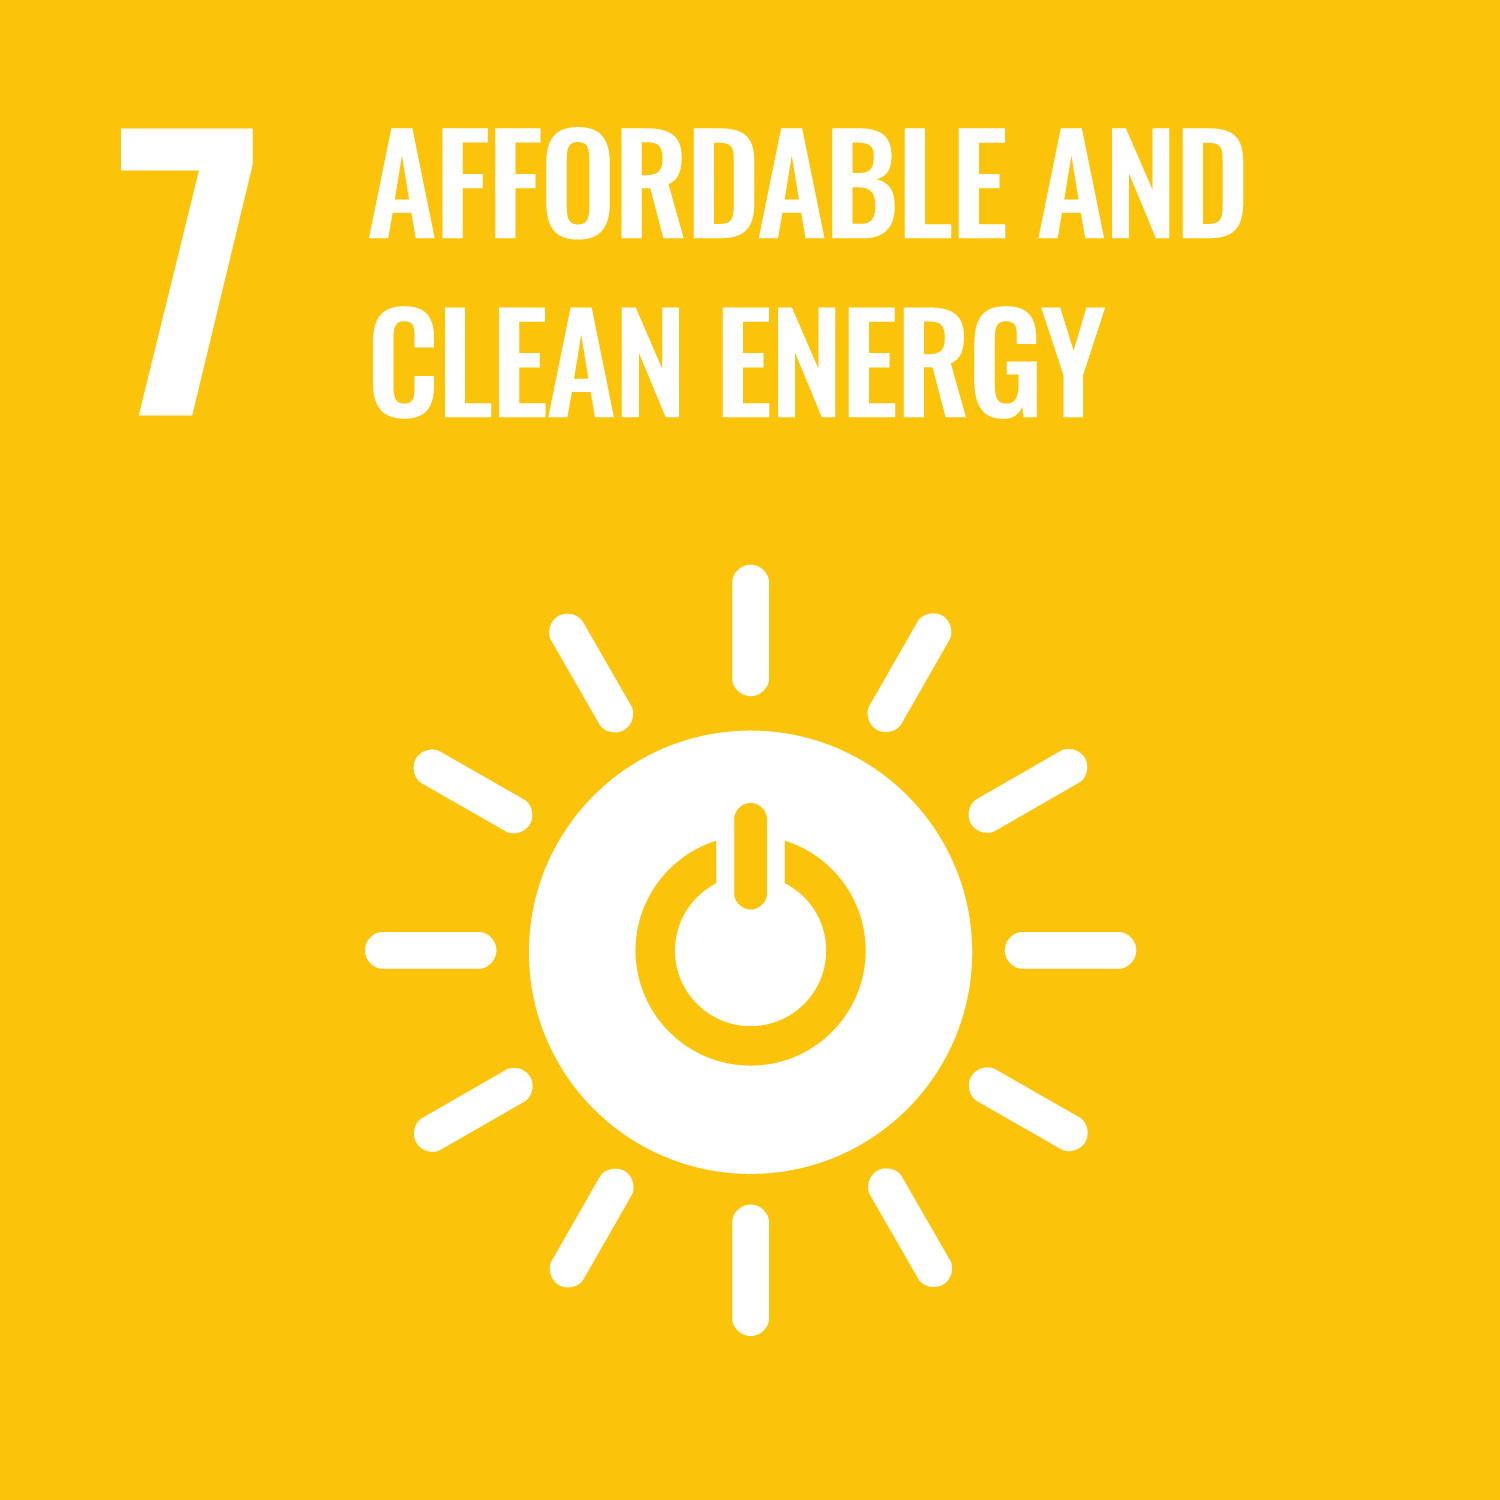 UN SDG 7 Affordable and Clean Energy